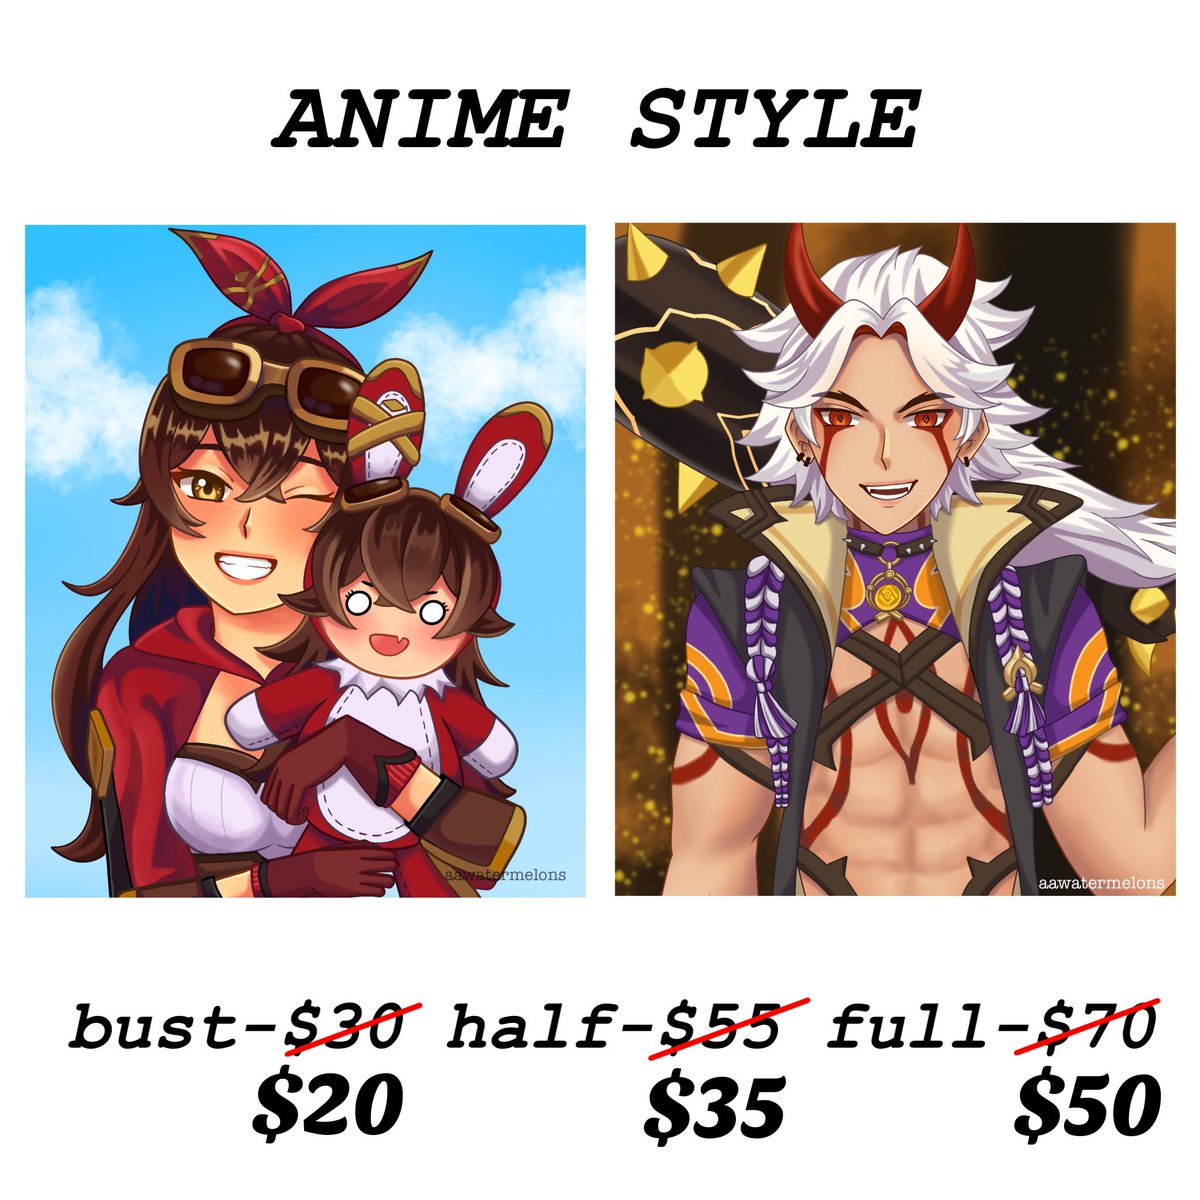 @ShopieCute hii im open for nsfw comms as well! let me know if you like my anime style 💗